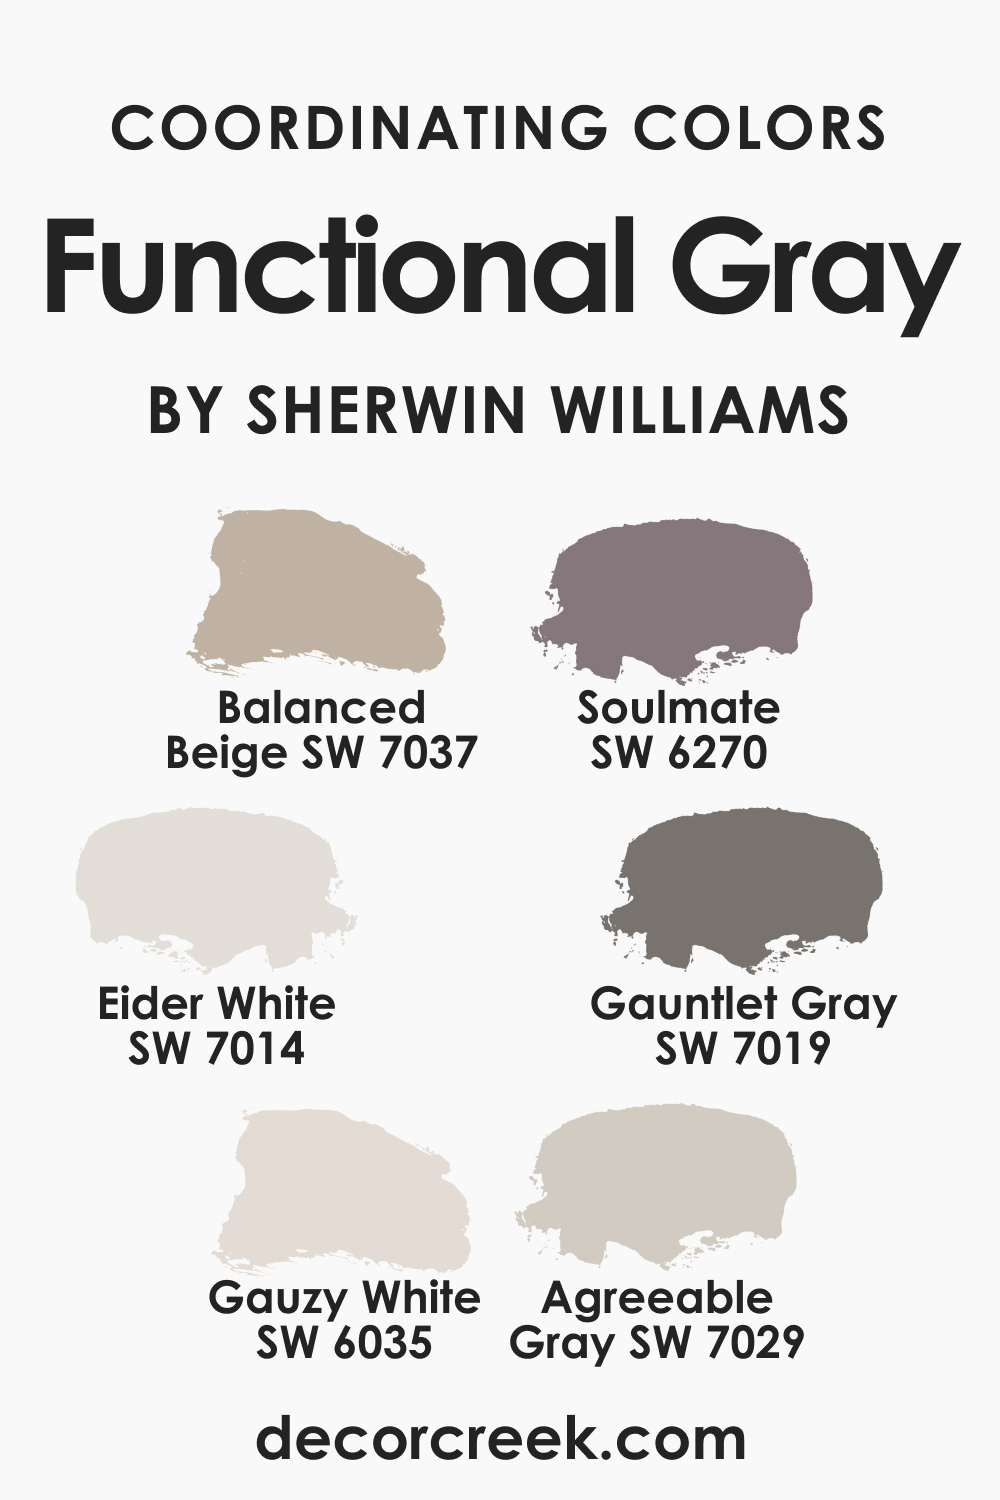 Coordinating Colors for SW Functional Gray